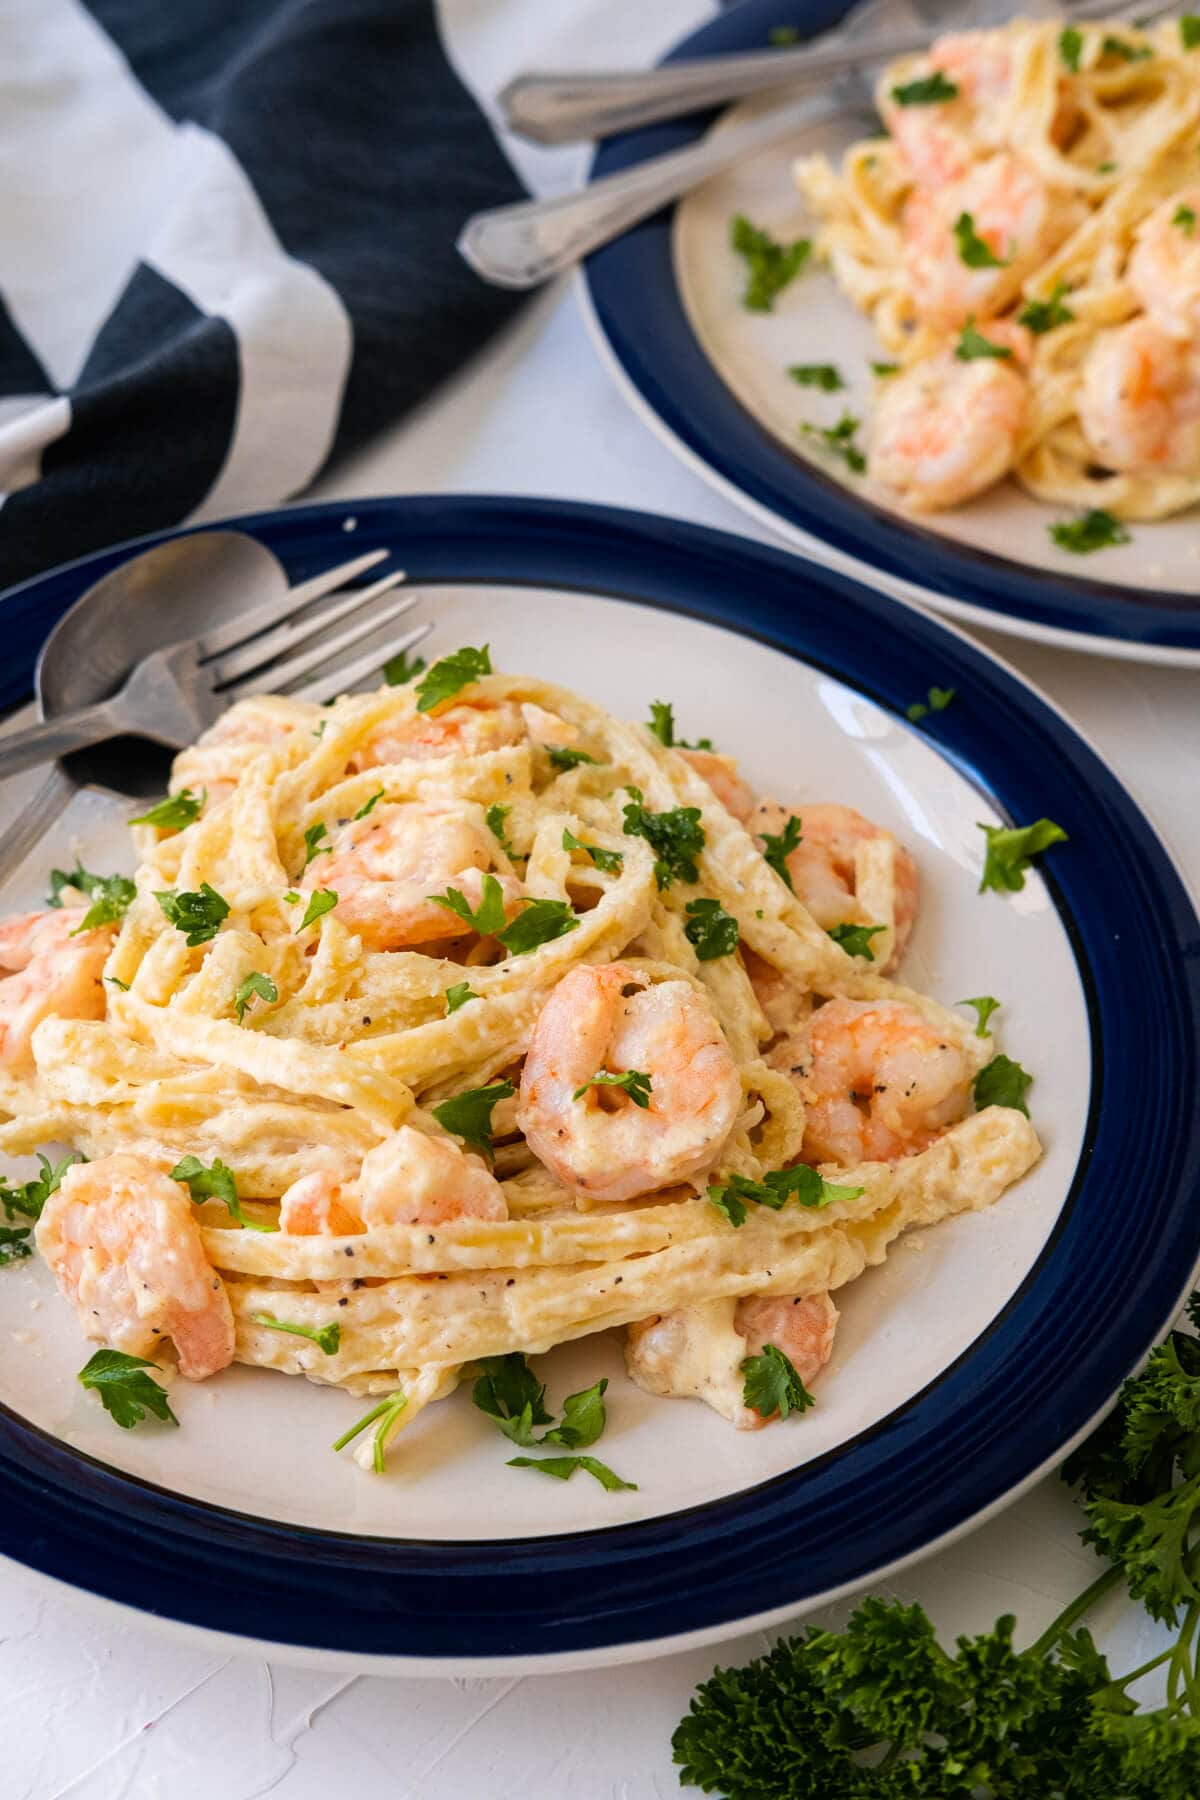 Rich, creamy shrimp fettuccine alfredo on the plate with a white and navy color kitchen towel placed aside.